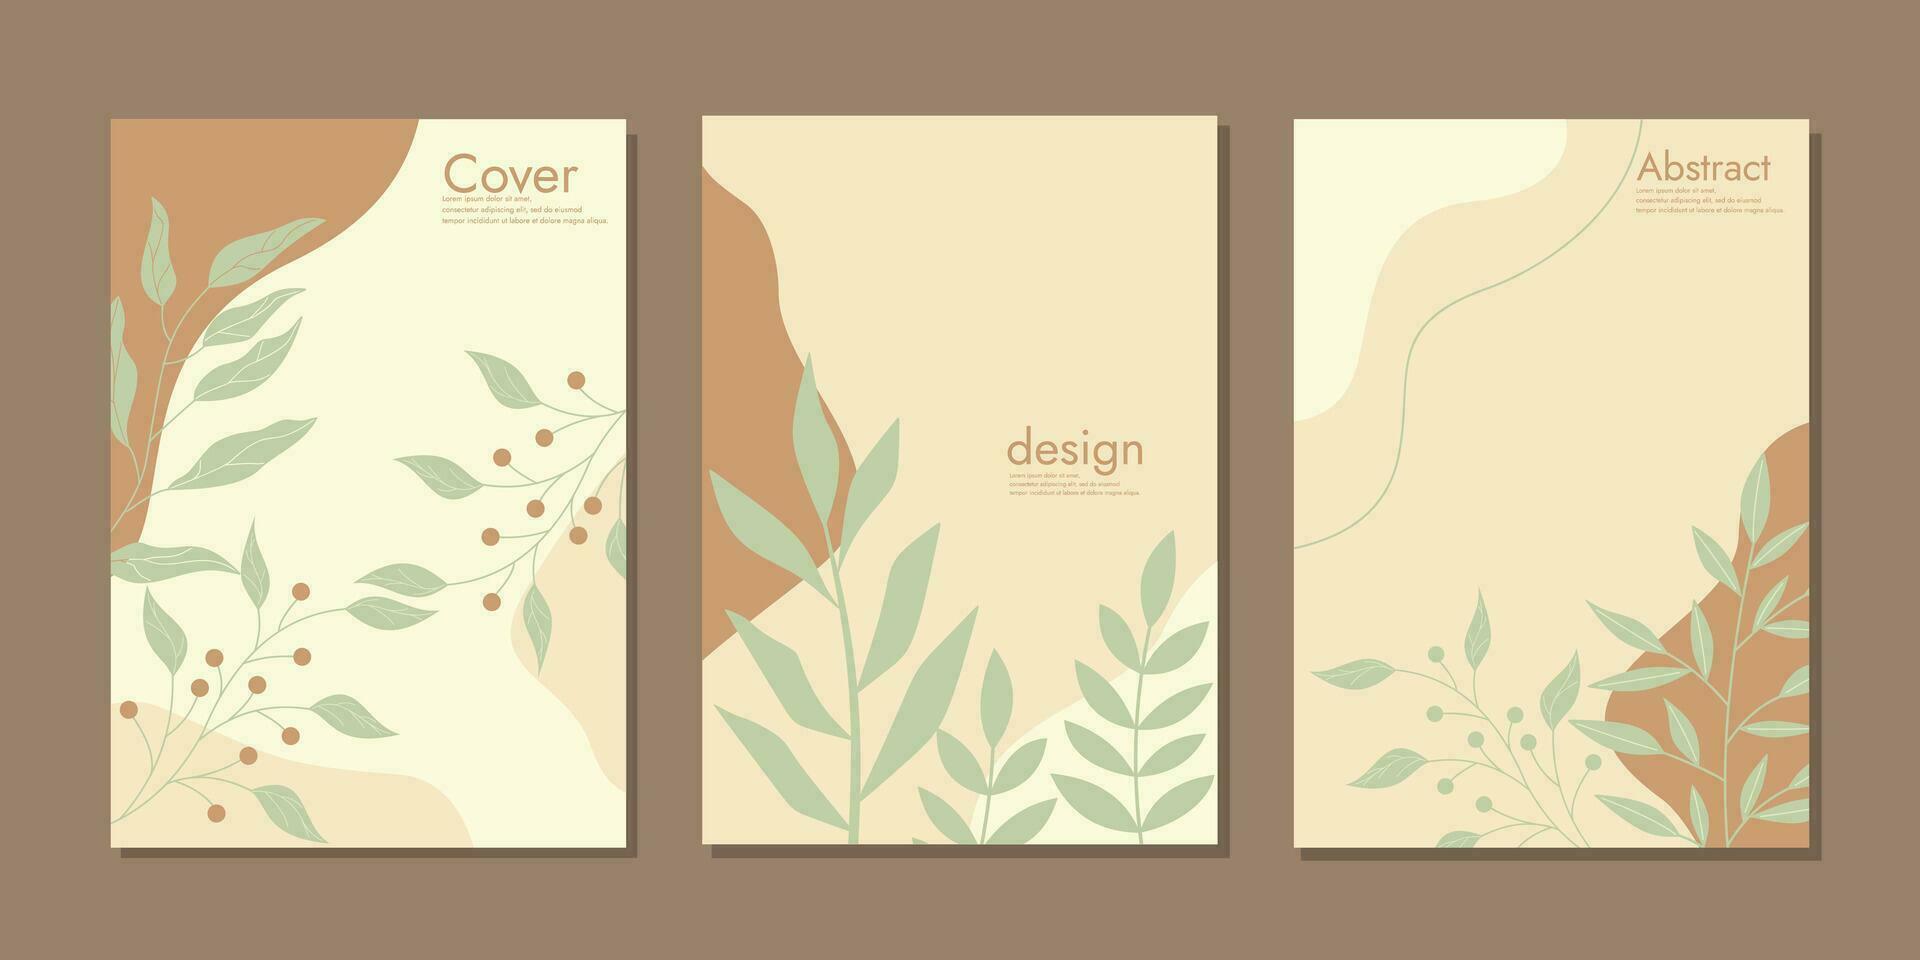 book cover mockup layout design with hand drawn floral decorations. abstract botanical background. size A4 For notebooks, planners, brochures, books, catalogs vector